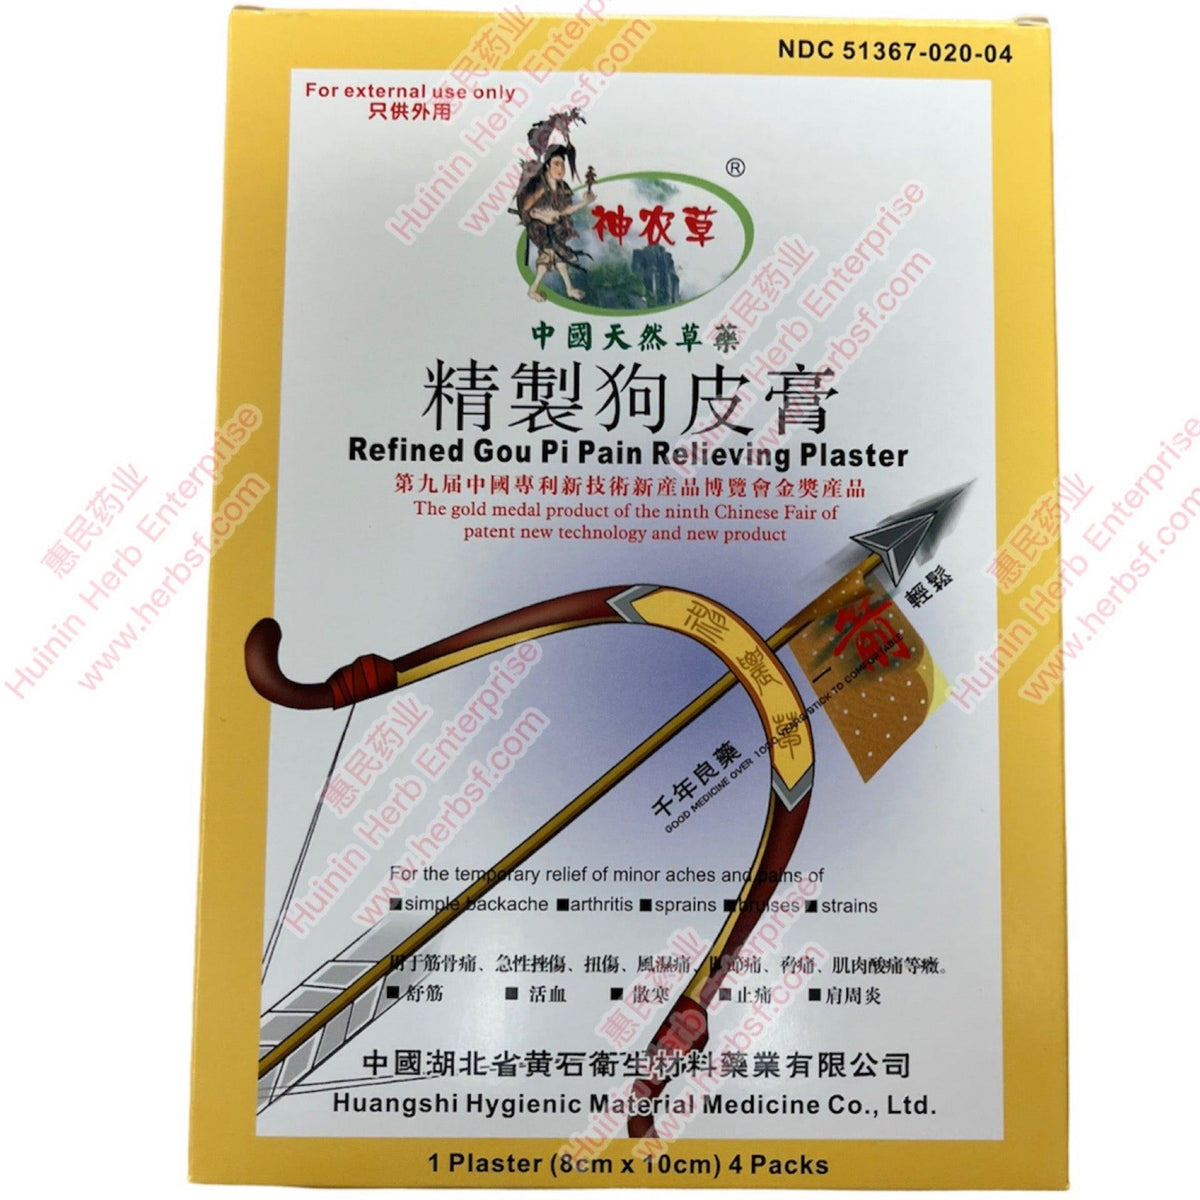 Refined Gou Pi Pain Relieving Plaster - Huimin Herb Online, LLC